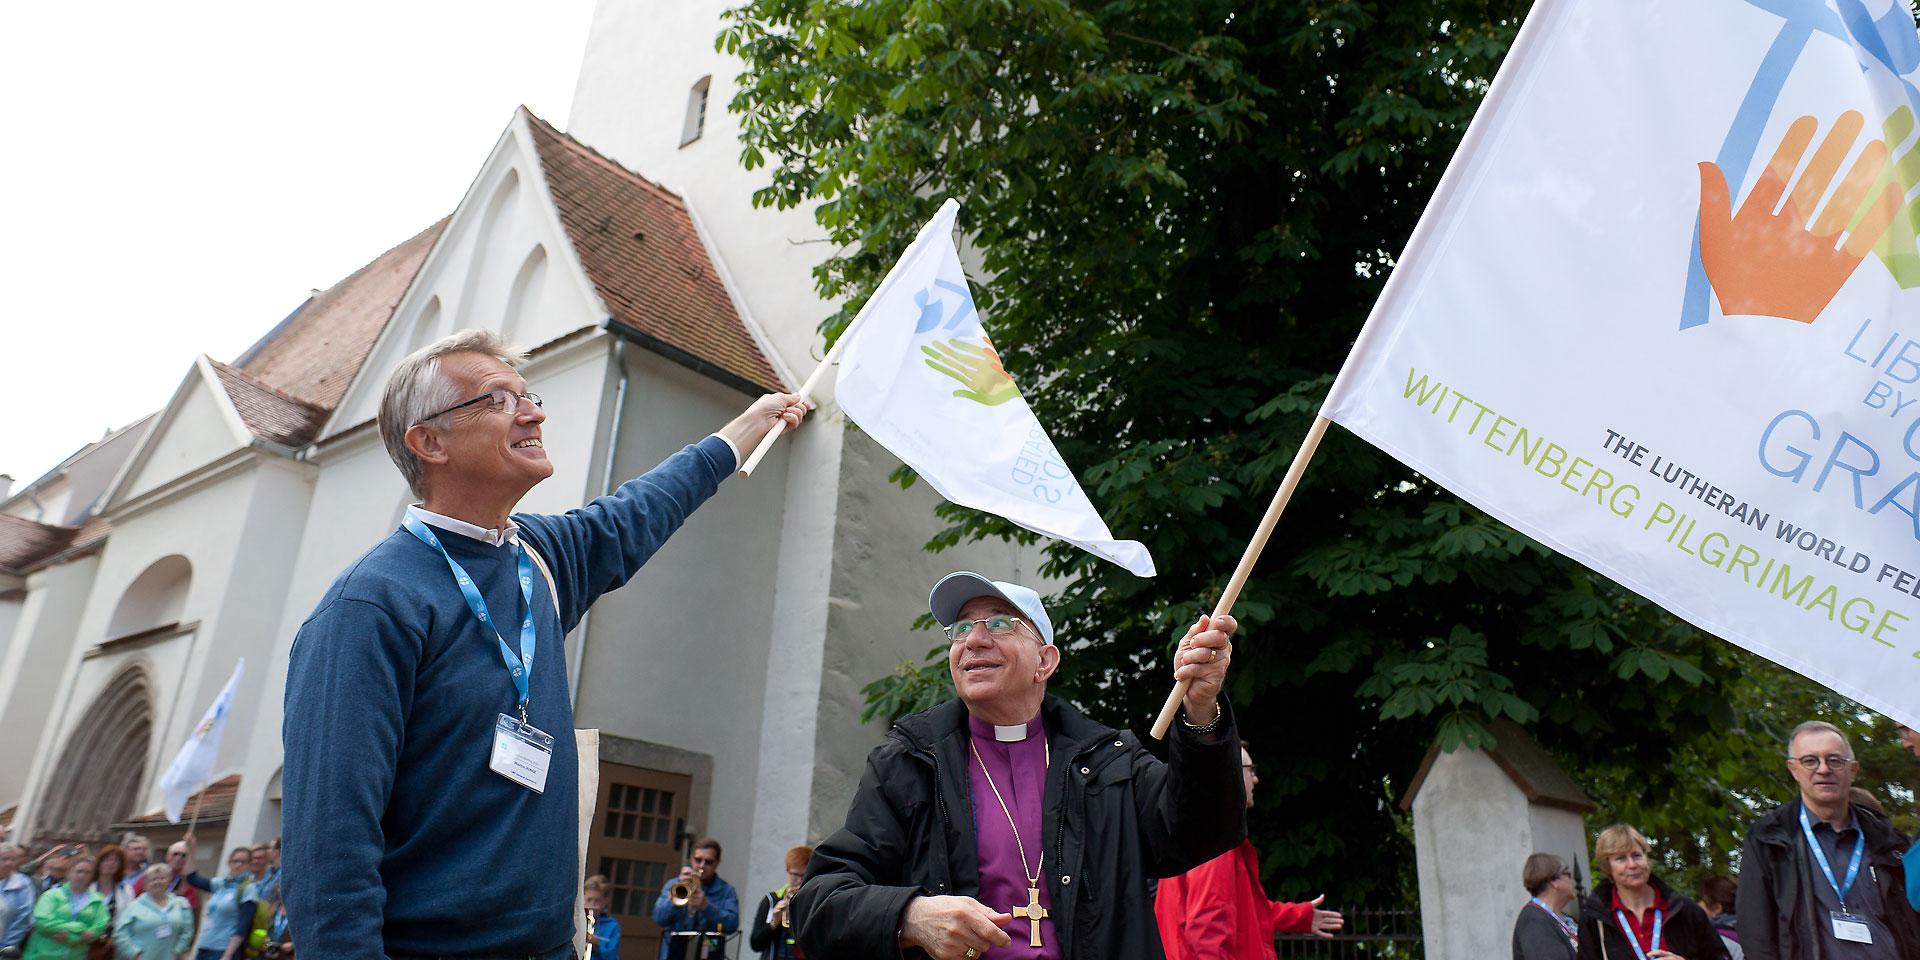 Liberated by God's Grace â Wittenberg Pilgrimage 2016. LWF General Secretary Martin Junge and LWF President at the beginning of the pilgrimage in front of the St. Nikolai Church in Coswig. Photo: LWF/Marko Schoeneberg